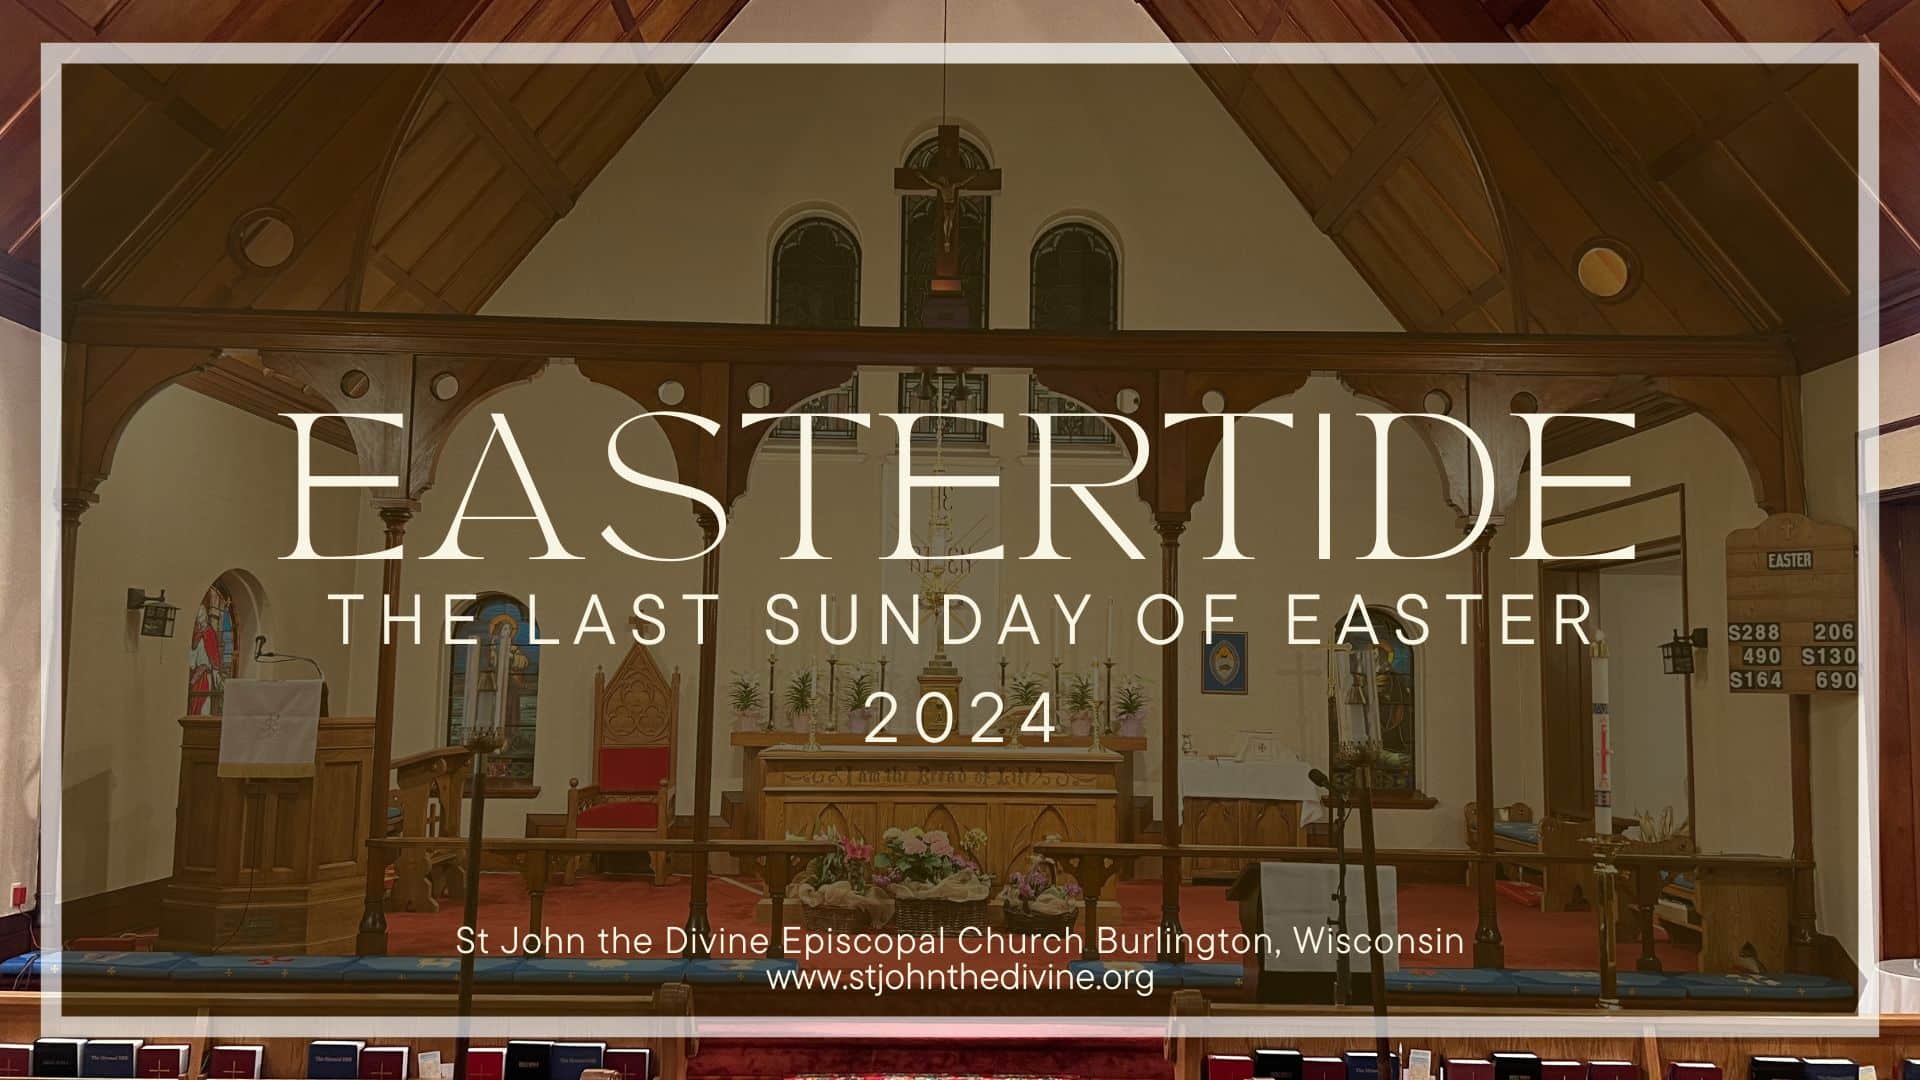 The Last Sunday of Easter 2024